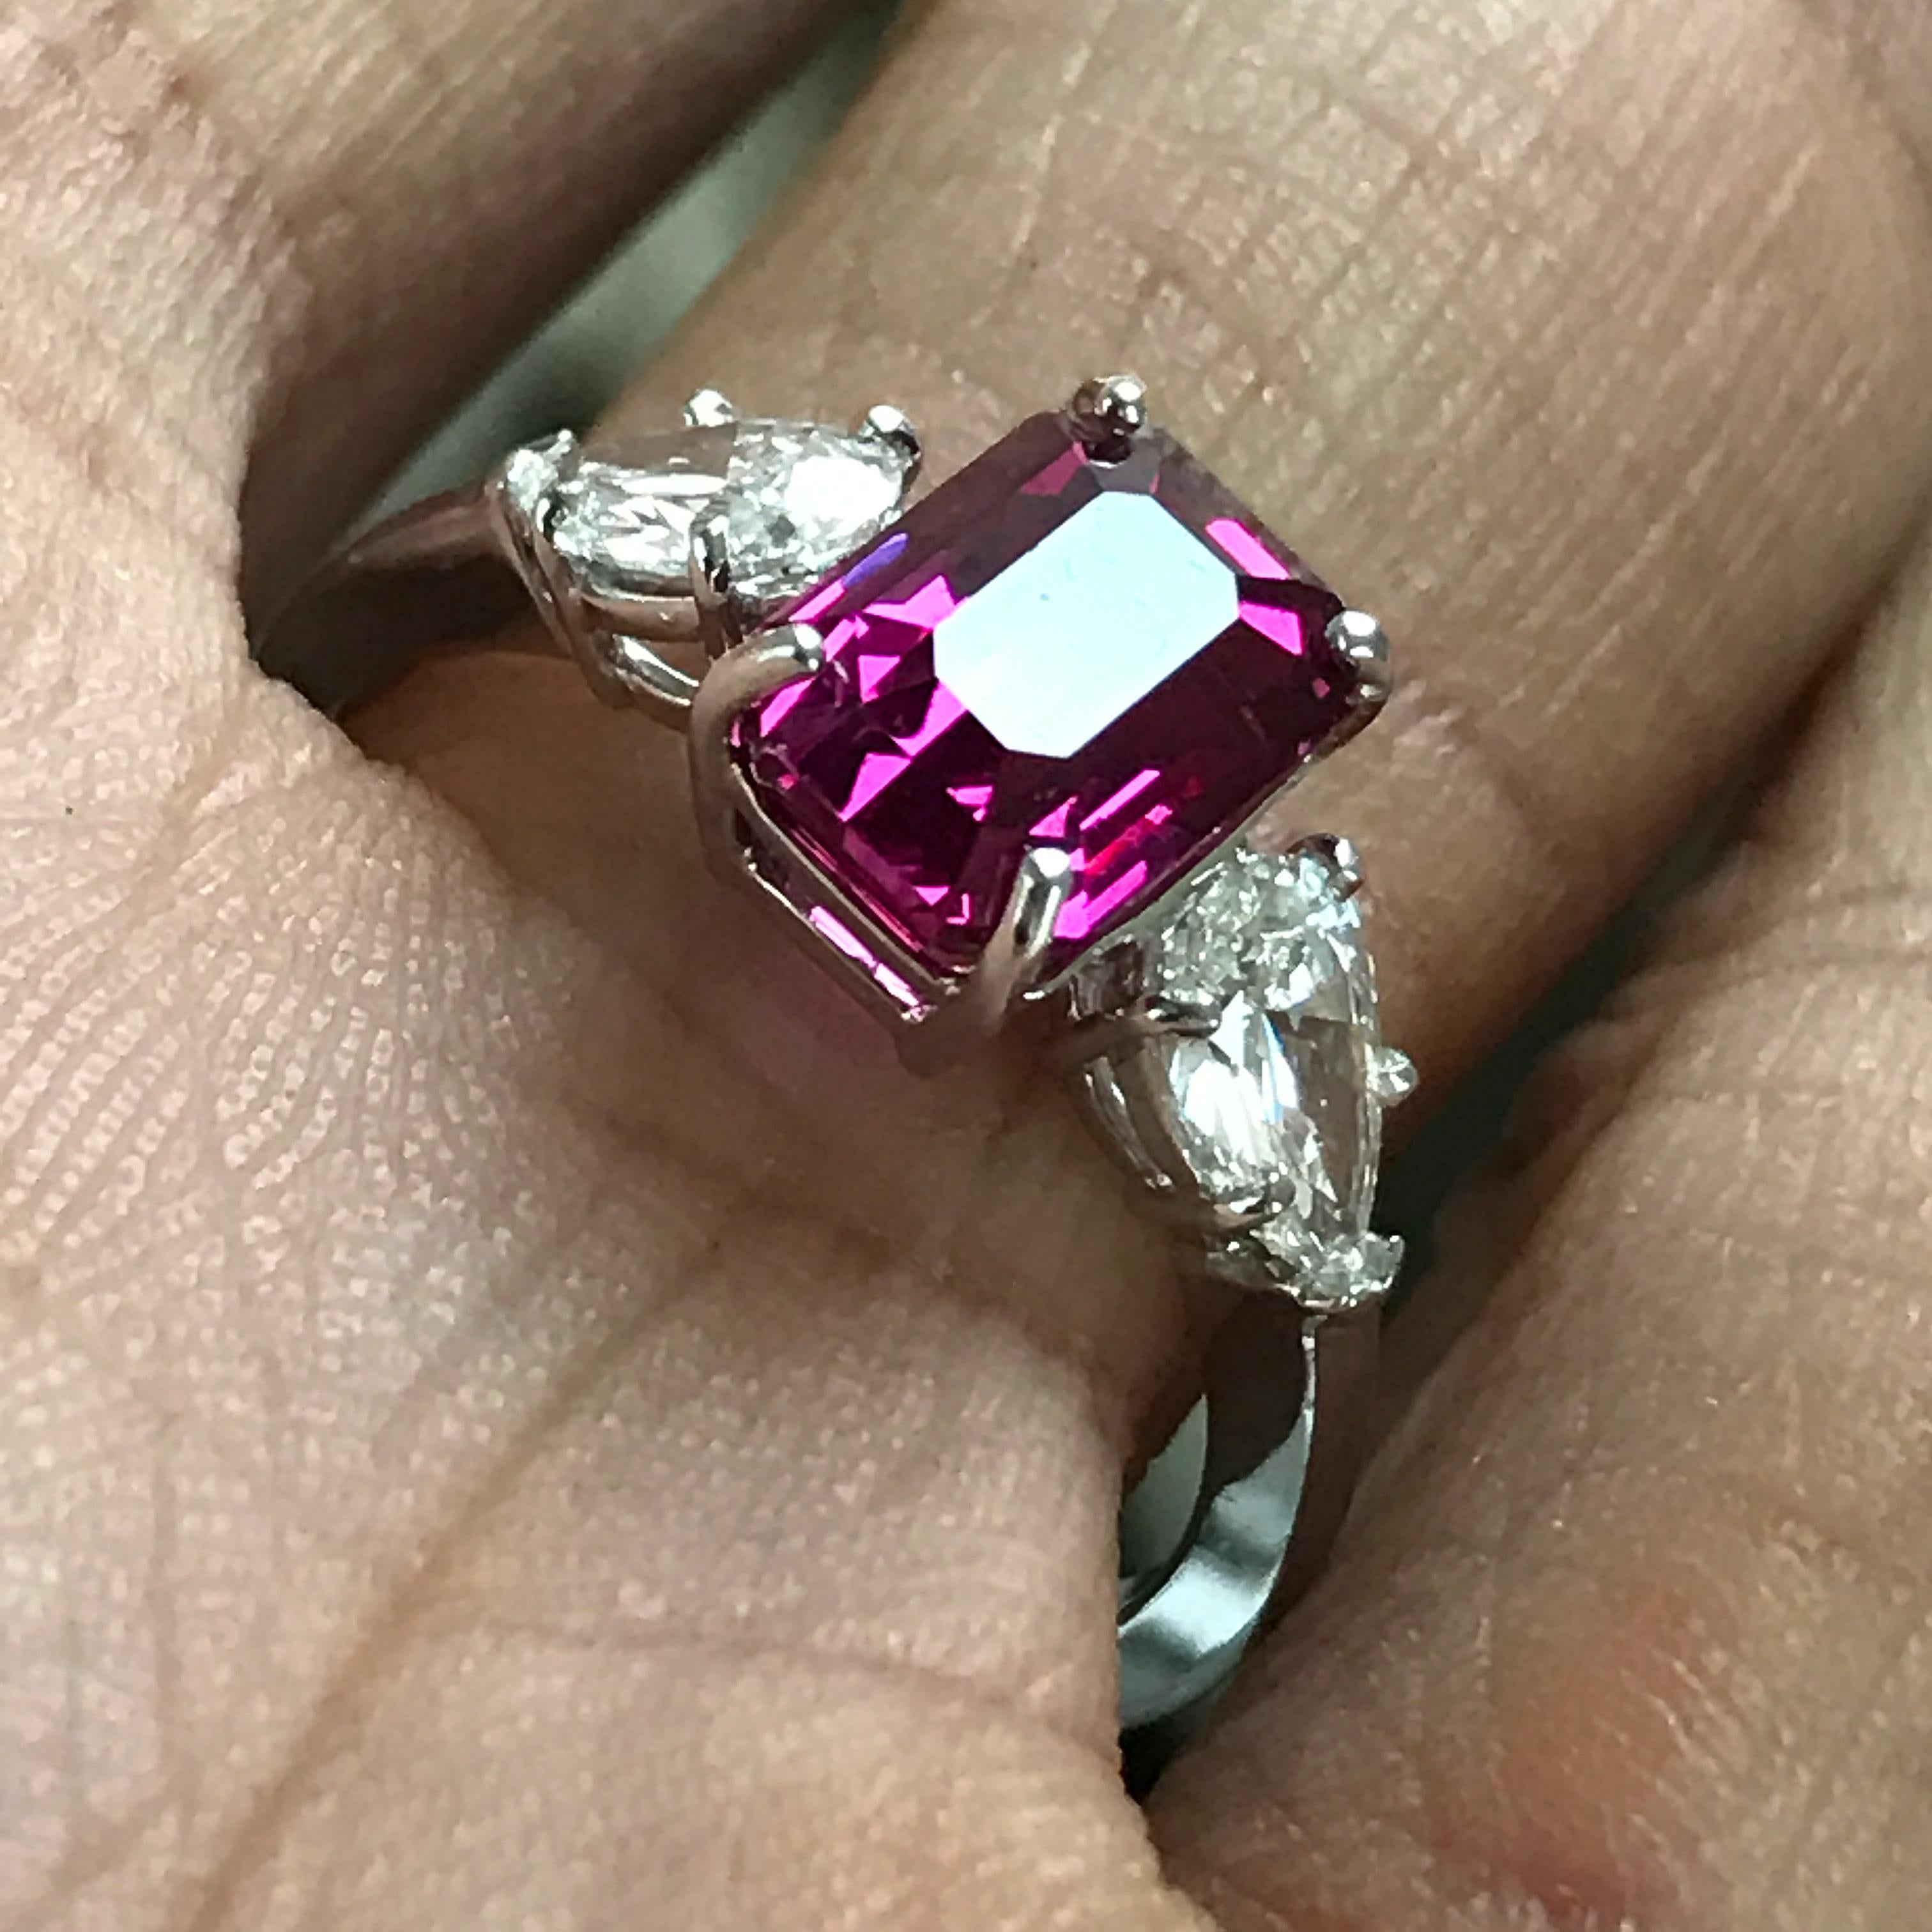 Main Stone Info:

1. Carat Weight: 2.8+ 

2. Color: Pink

3. Tone:  Medium - Nice, 7.0 Out of 10

4. Hue: Fancy Intense Pink.

3. Clarity:  Excellent clarity, no inclusions to the eye. VS if diamond rating.

4. Cut: This stone has a excellent